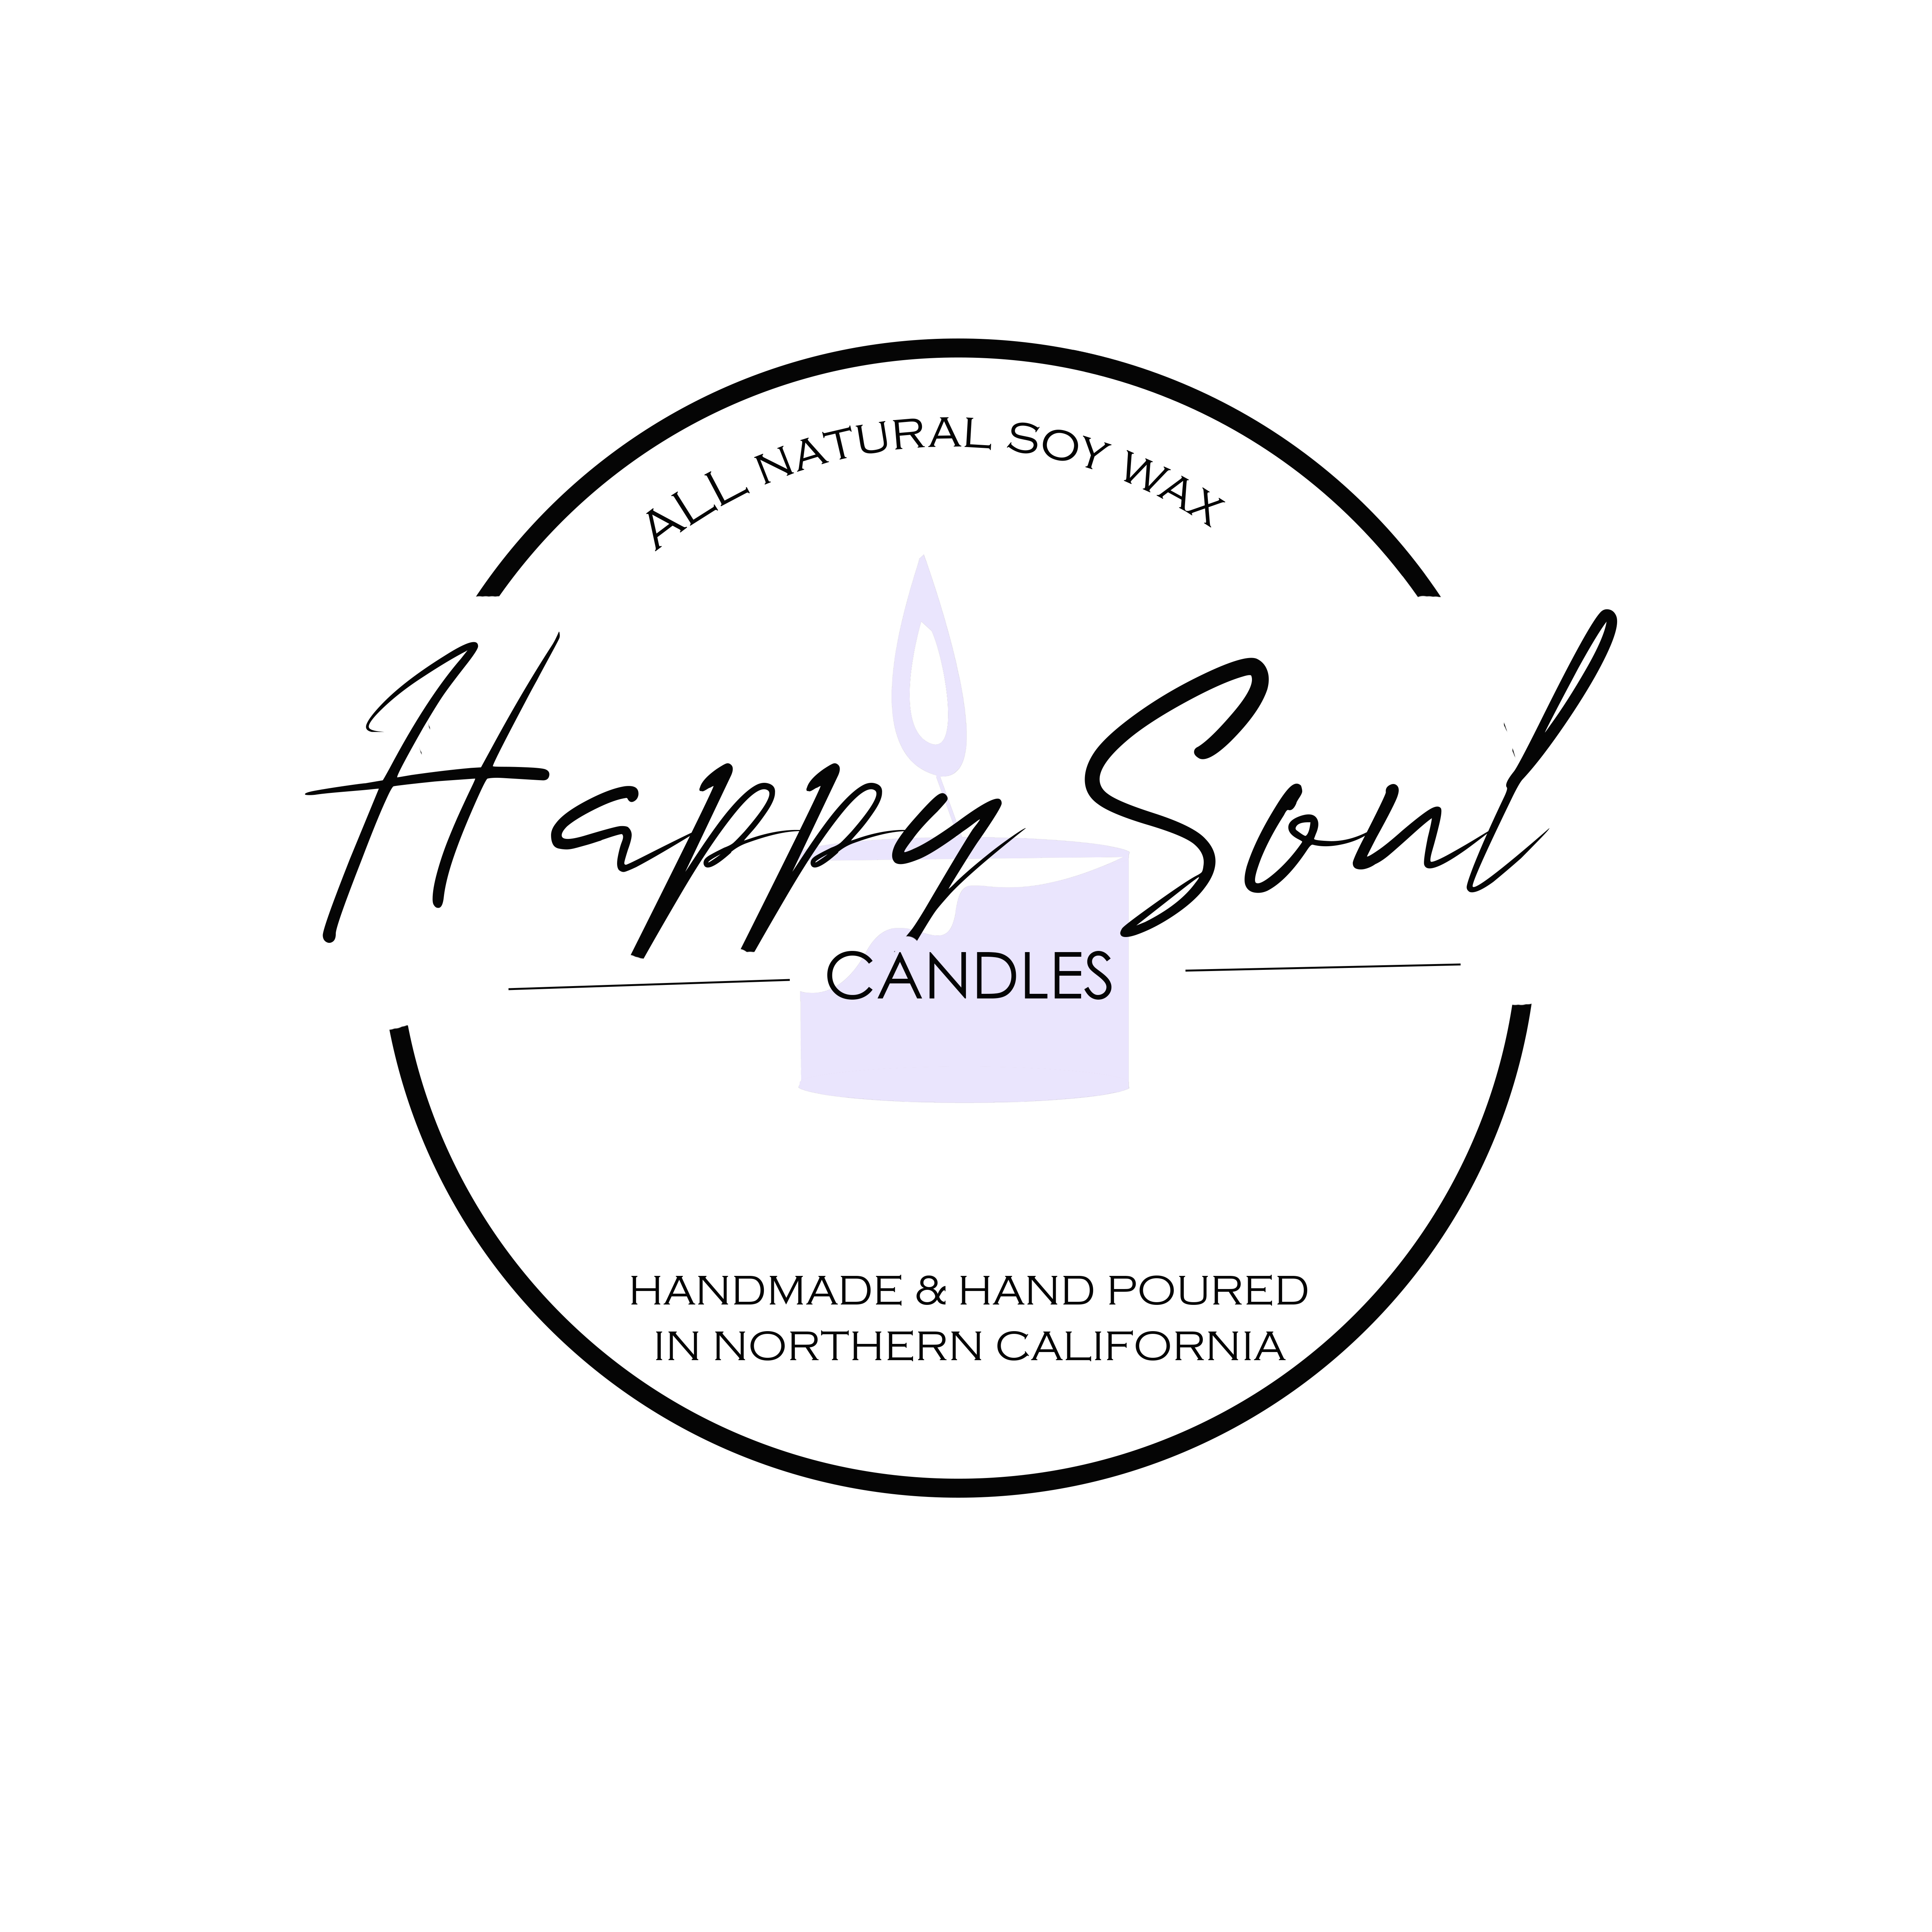 The logo or business face of "Happy Soul Candles LLC"